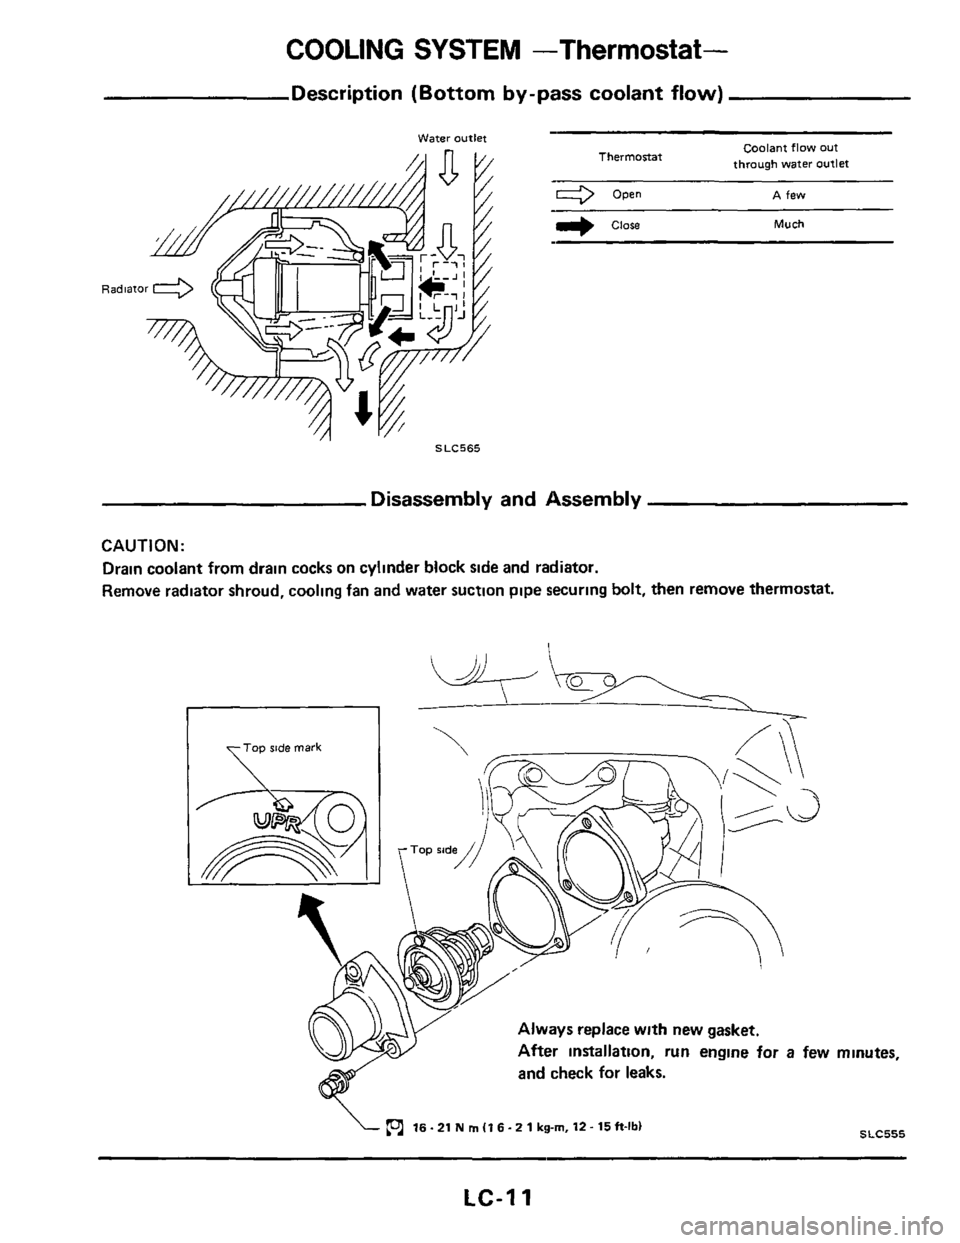 NISSAN 300ZX 1984 Z31 Engine Lubrication And Cooling System User Guide COOLING SYSTEM -Thermostat- 
Description (Bottom by-pass coolant flow) 
- water OUtkt Coalant flow out 
through water Outlet Thermostat 
Open A few 
r) close Much 
SLC565 
Disassembly  and Assembly 
C